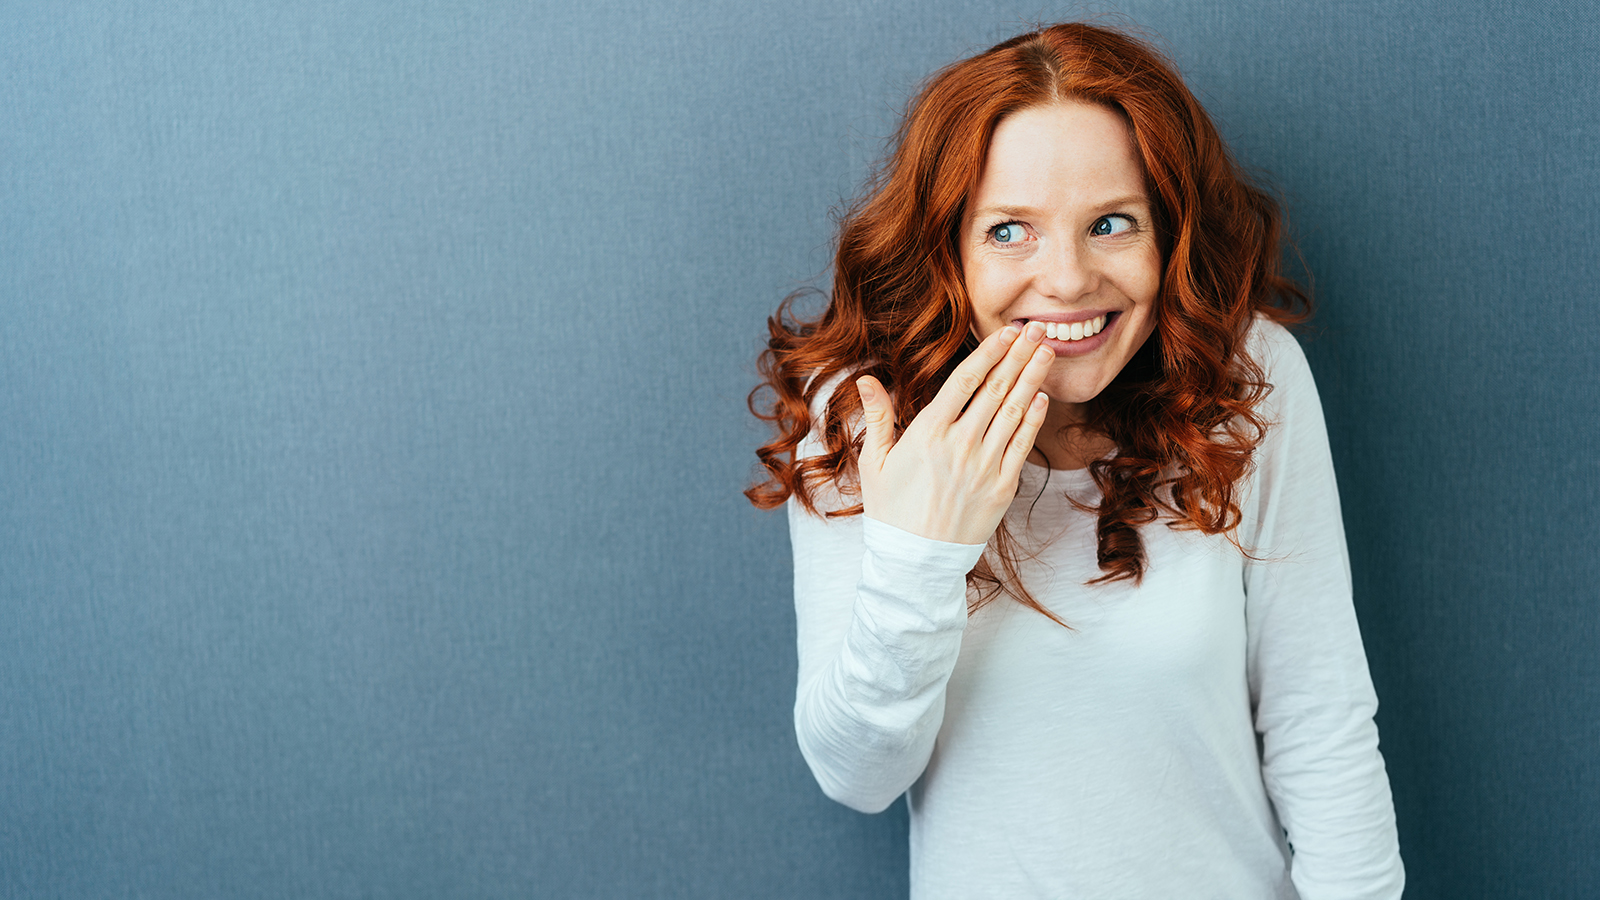 Cute young woman with gorgeous long curly red hair standing laughing behind her hand over a dark studio background with copy space